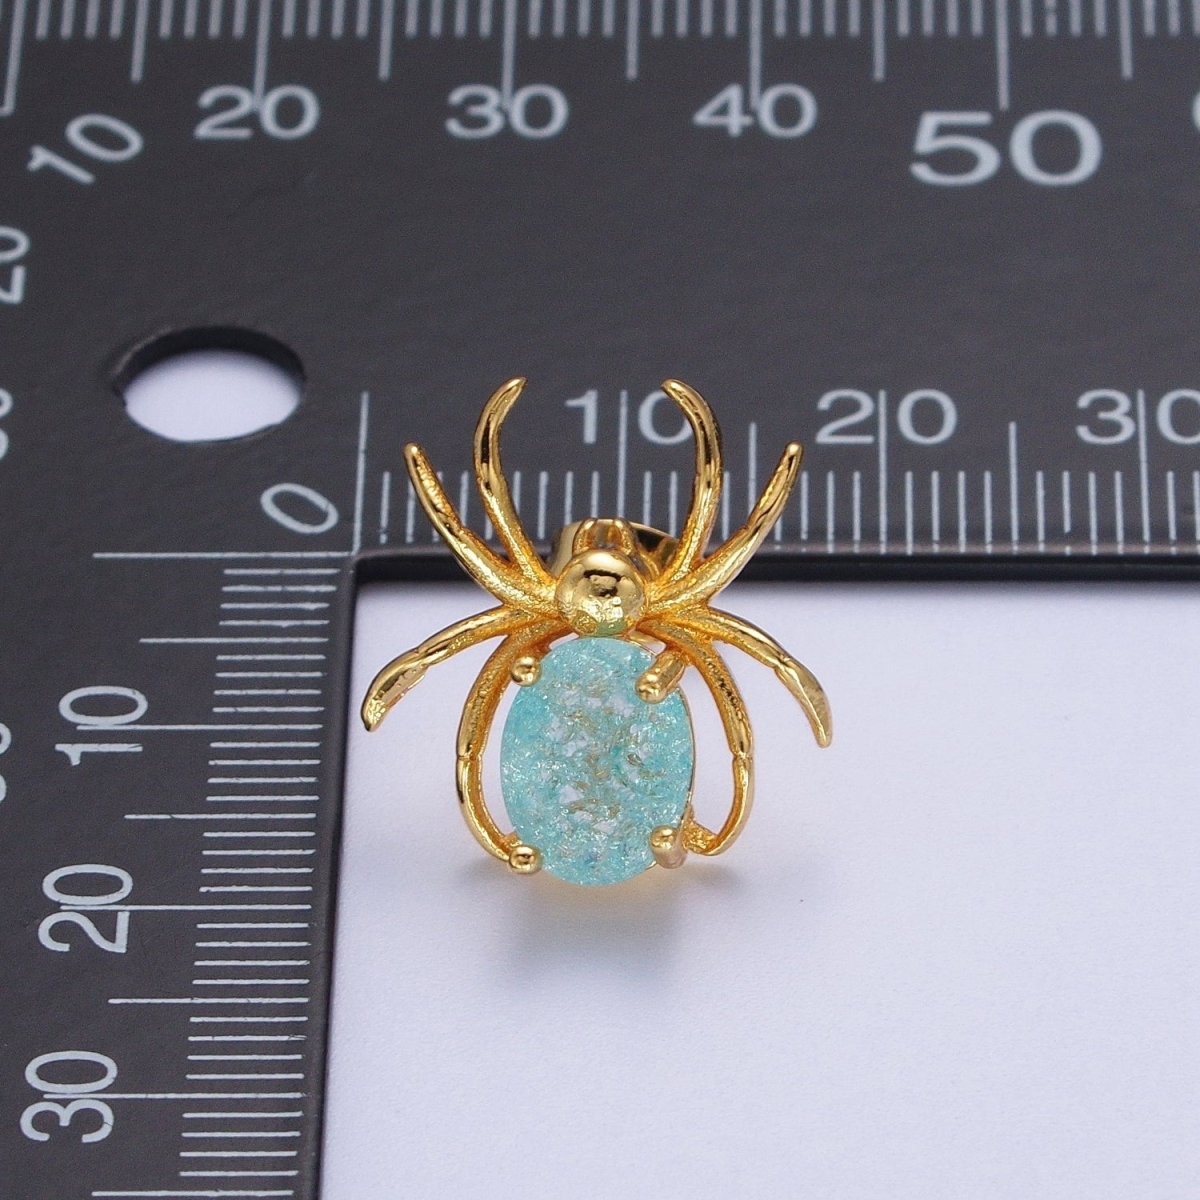 24K Gold Filled Spider Earring Blue Cubic Zirconia Gold Spider Stud Earrings for Halloween | AE-1015 - DLUXCA